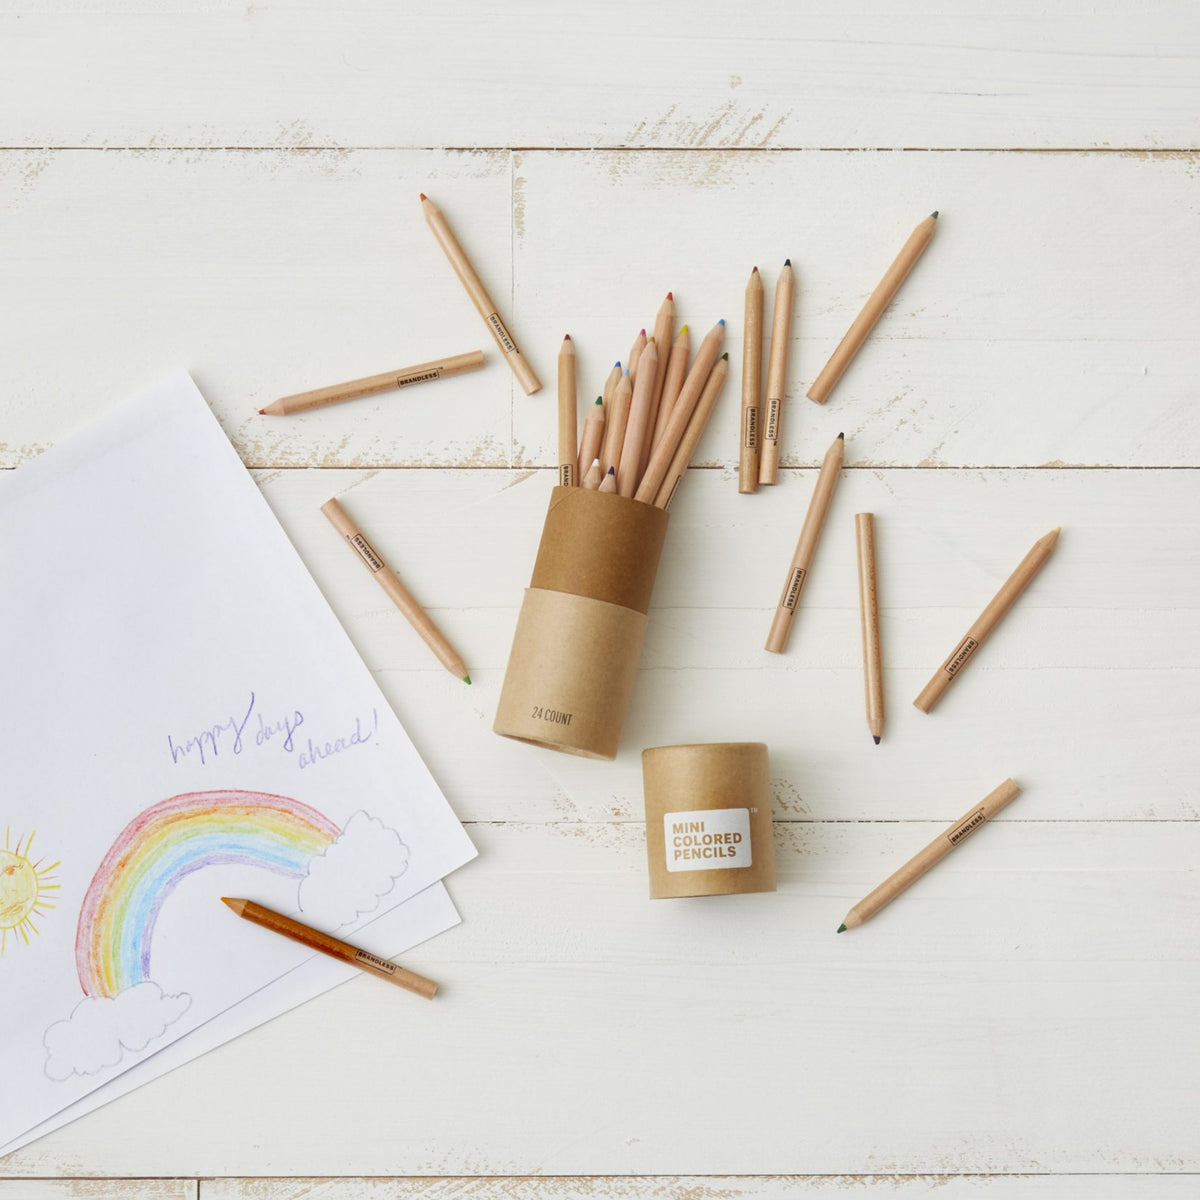 Lifestyle photo, showing a child&#39;s drawing of a rainbow next to a canister of mini colored pencils with many colors strewn about during the creative process of drawing.